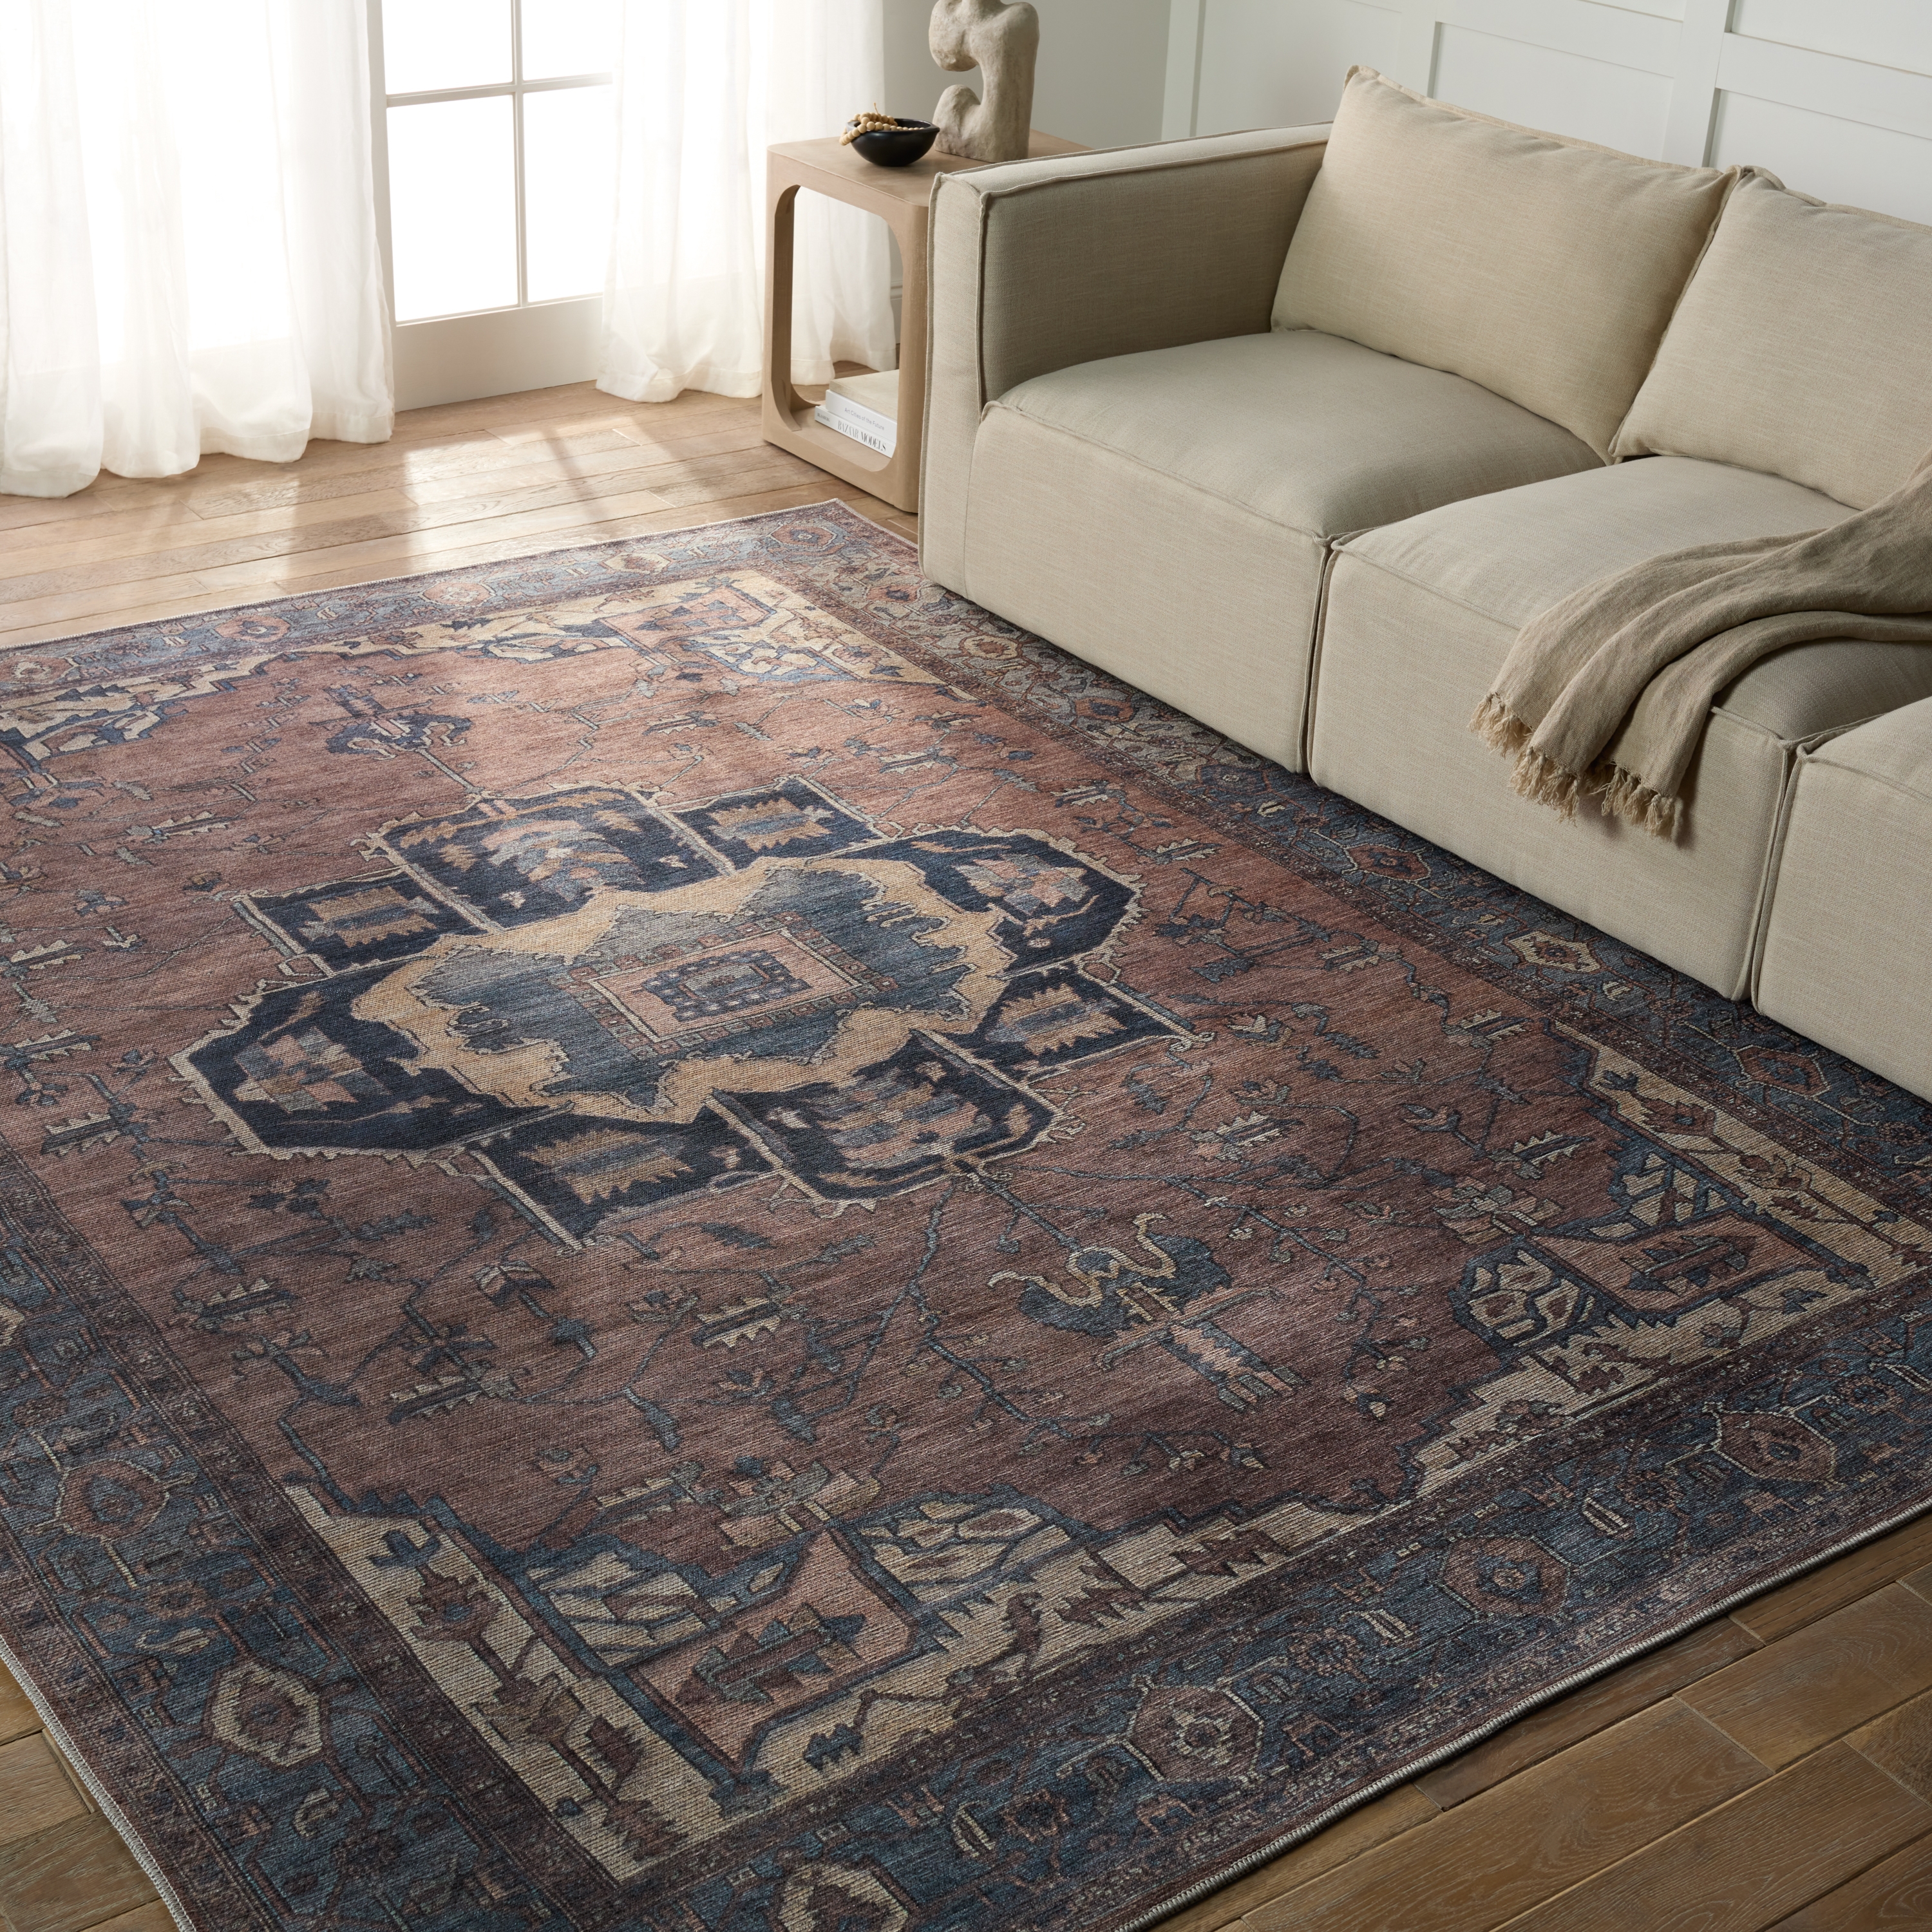 Vibe by Barrymore Medallion Blue/ Dark Brown Area Rug (7'10"X10') - Image 4